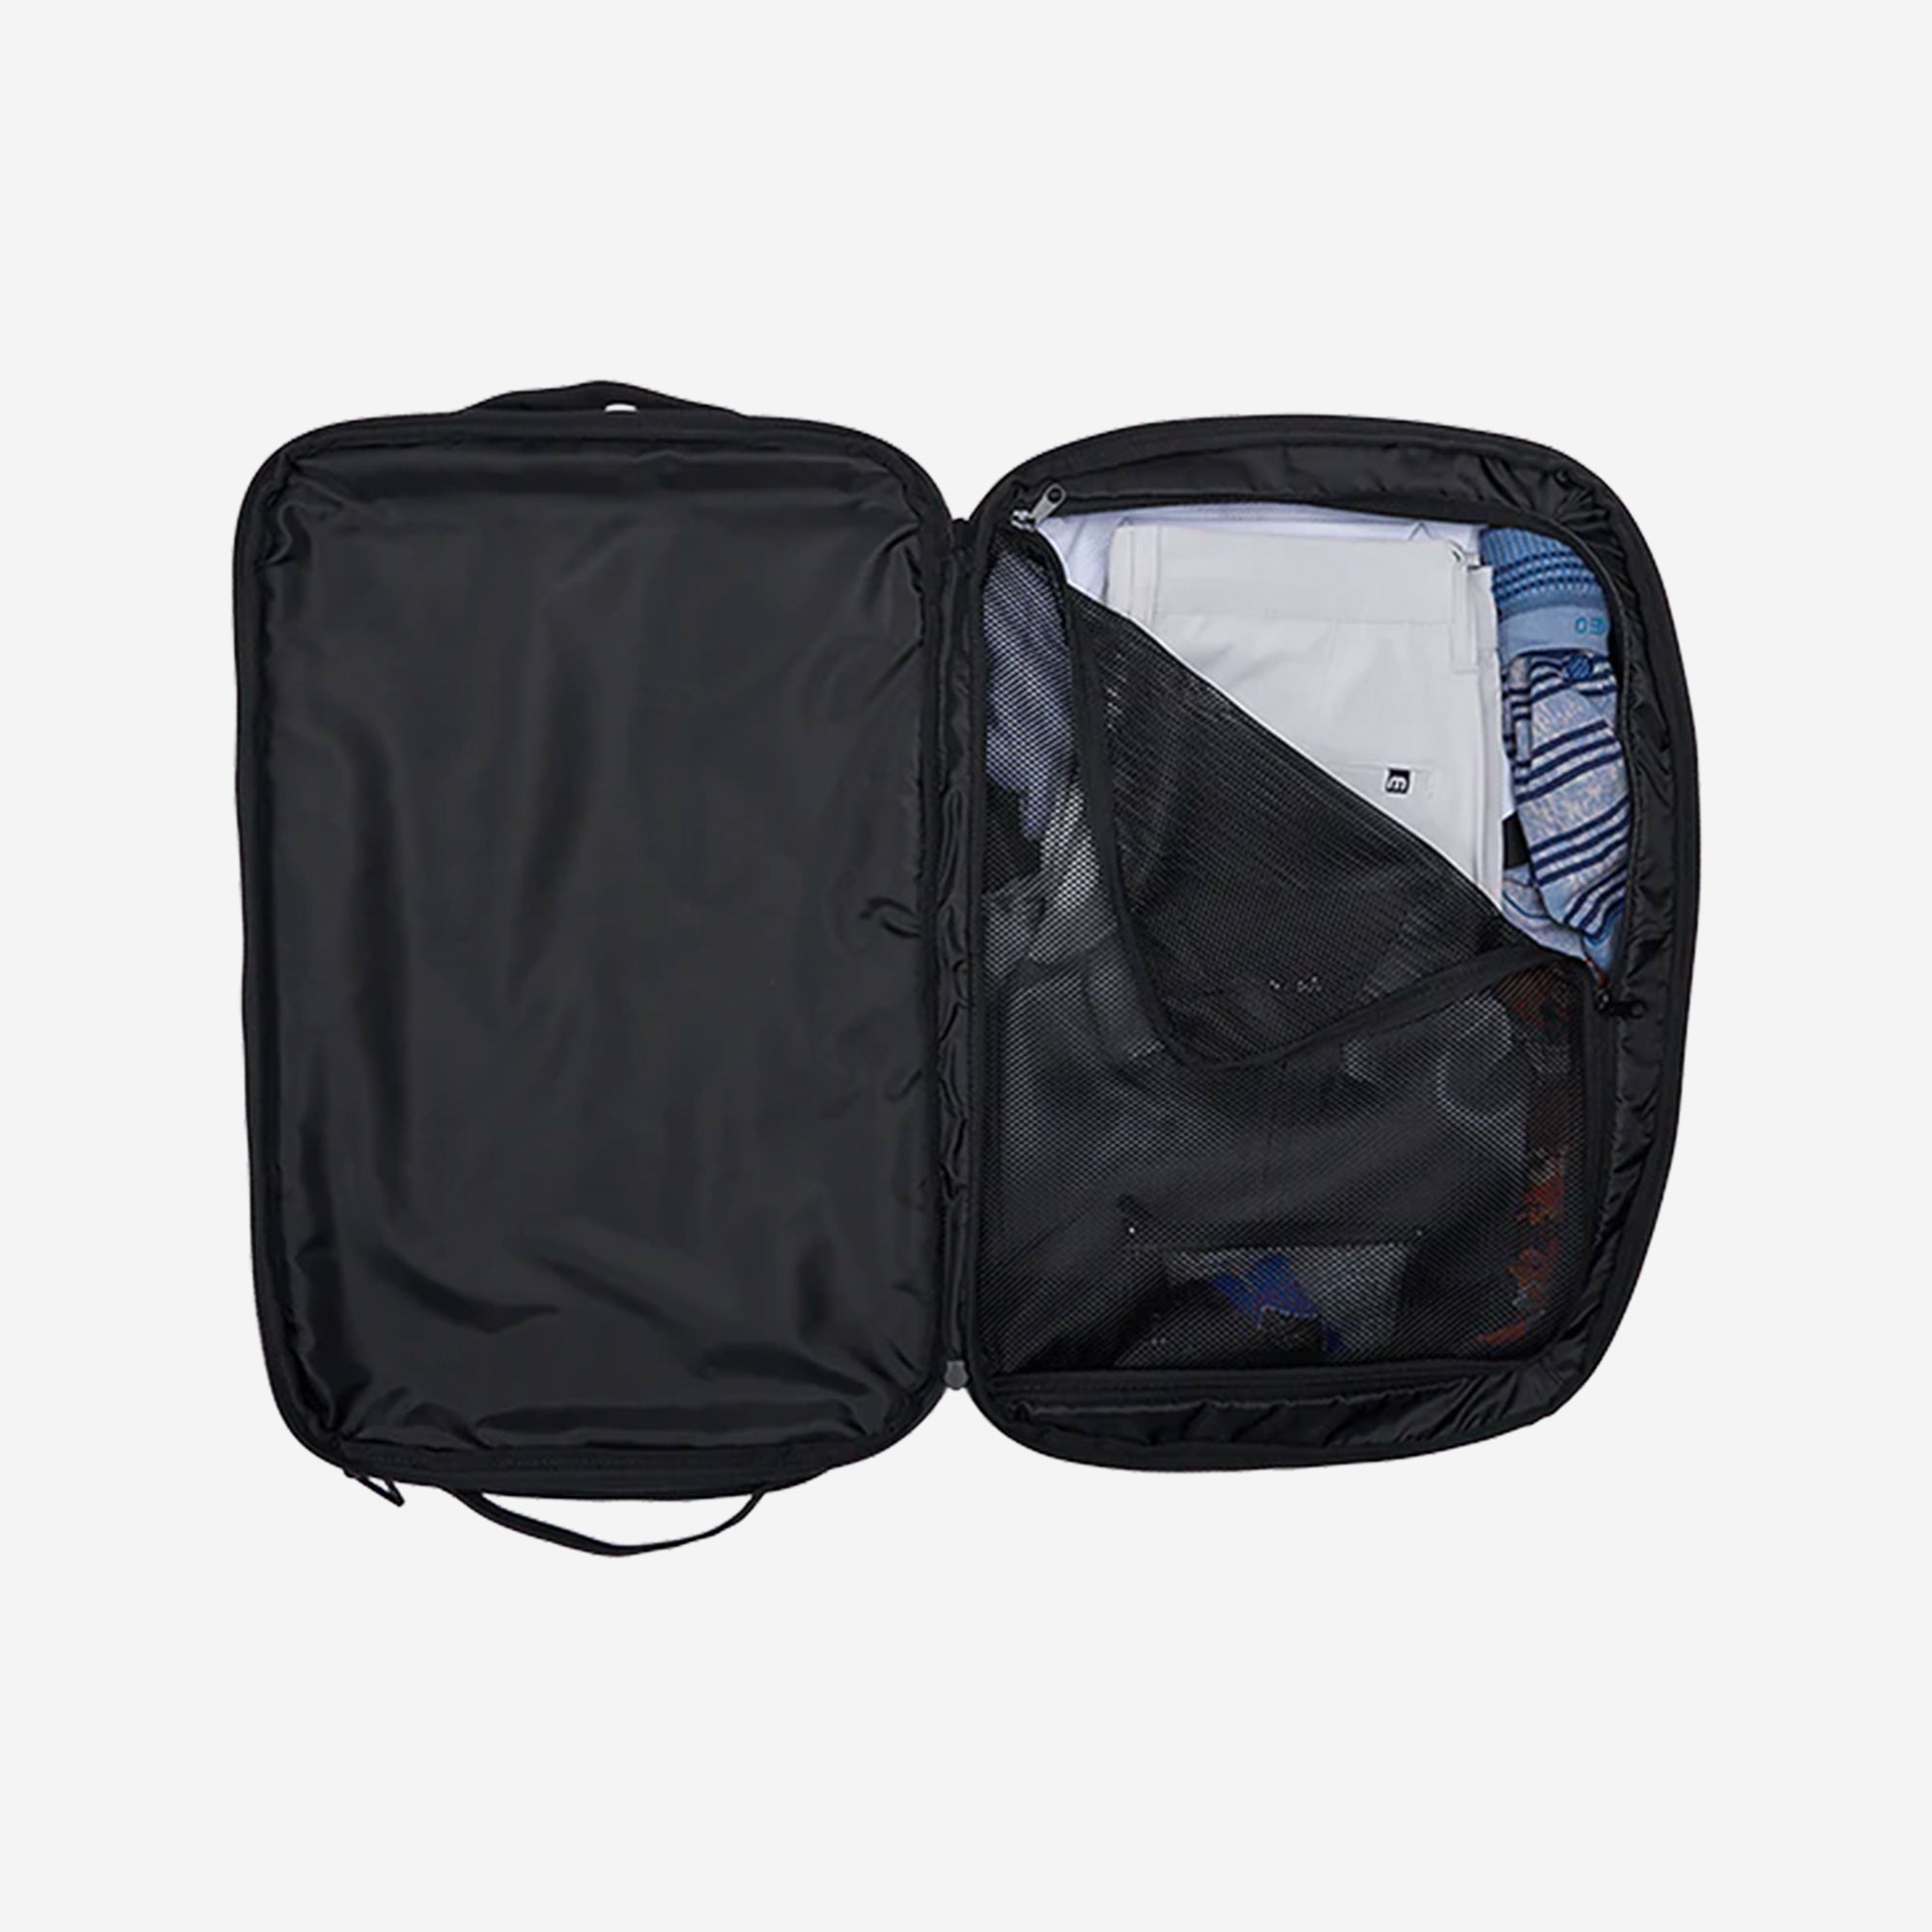 OGIO PACE PRO MAX TRAVEL DUFFEL PACK 45L